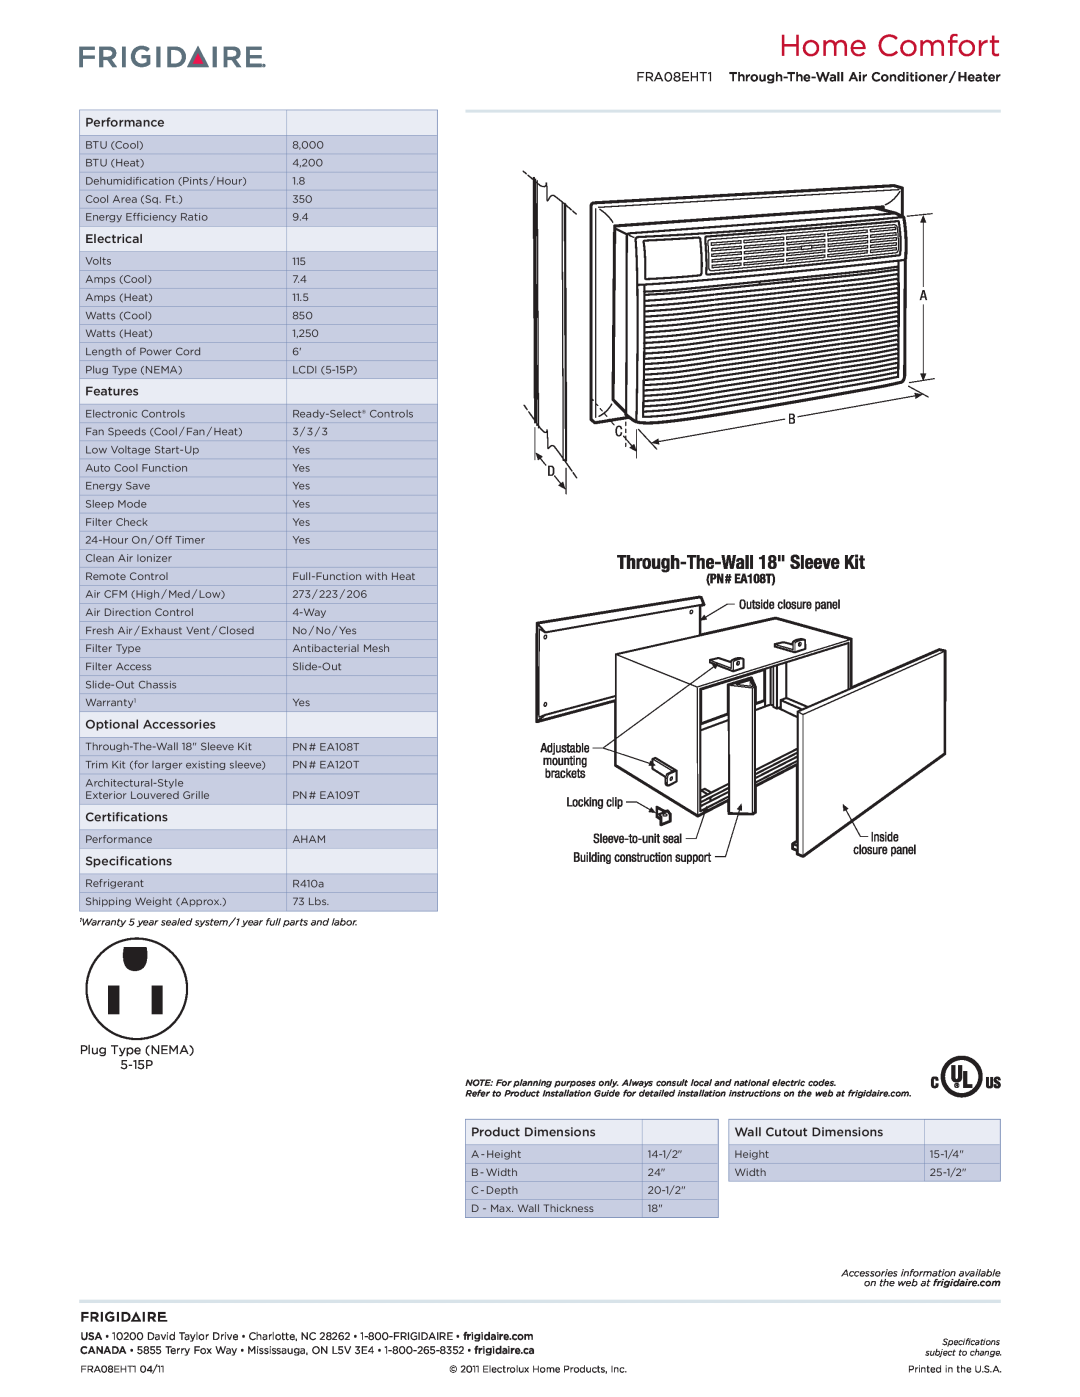 Frigidaire FRA08EHTI Home Comfort, Performance, Electrical, Features, Optional Accessories, Certifications, Specifications 